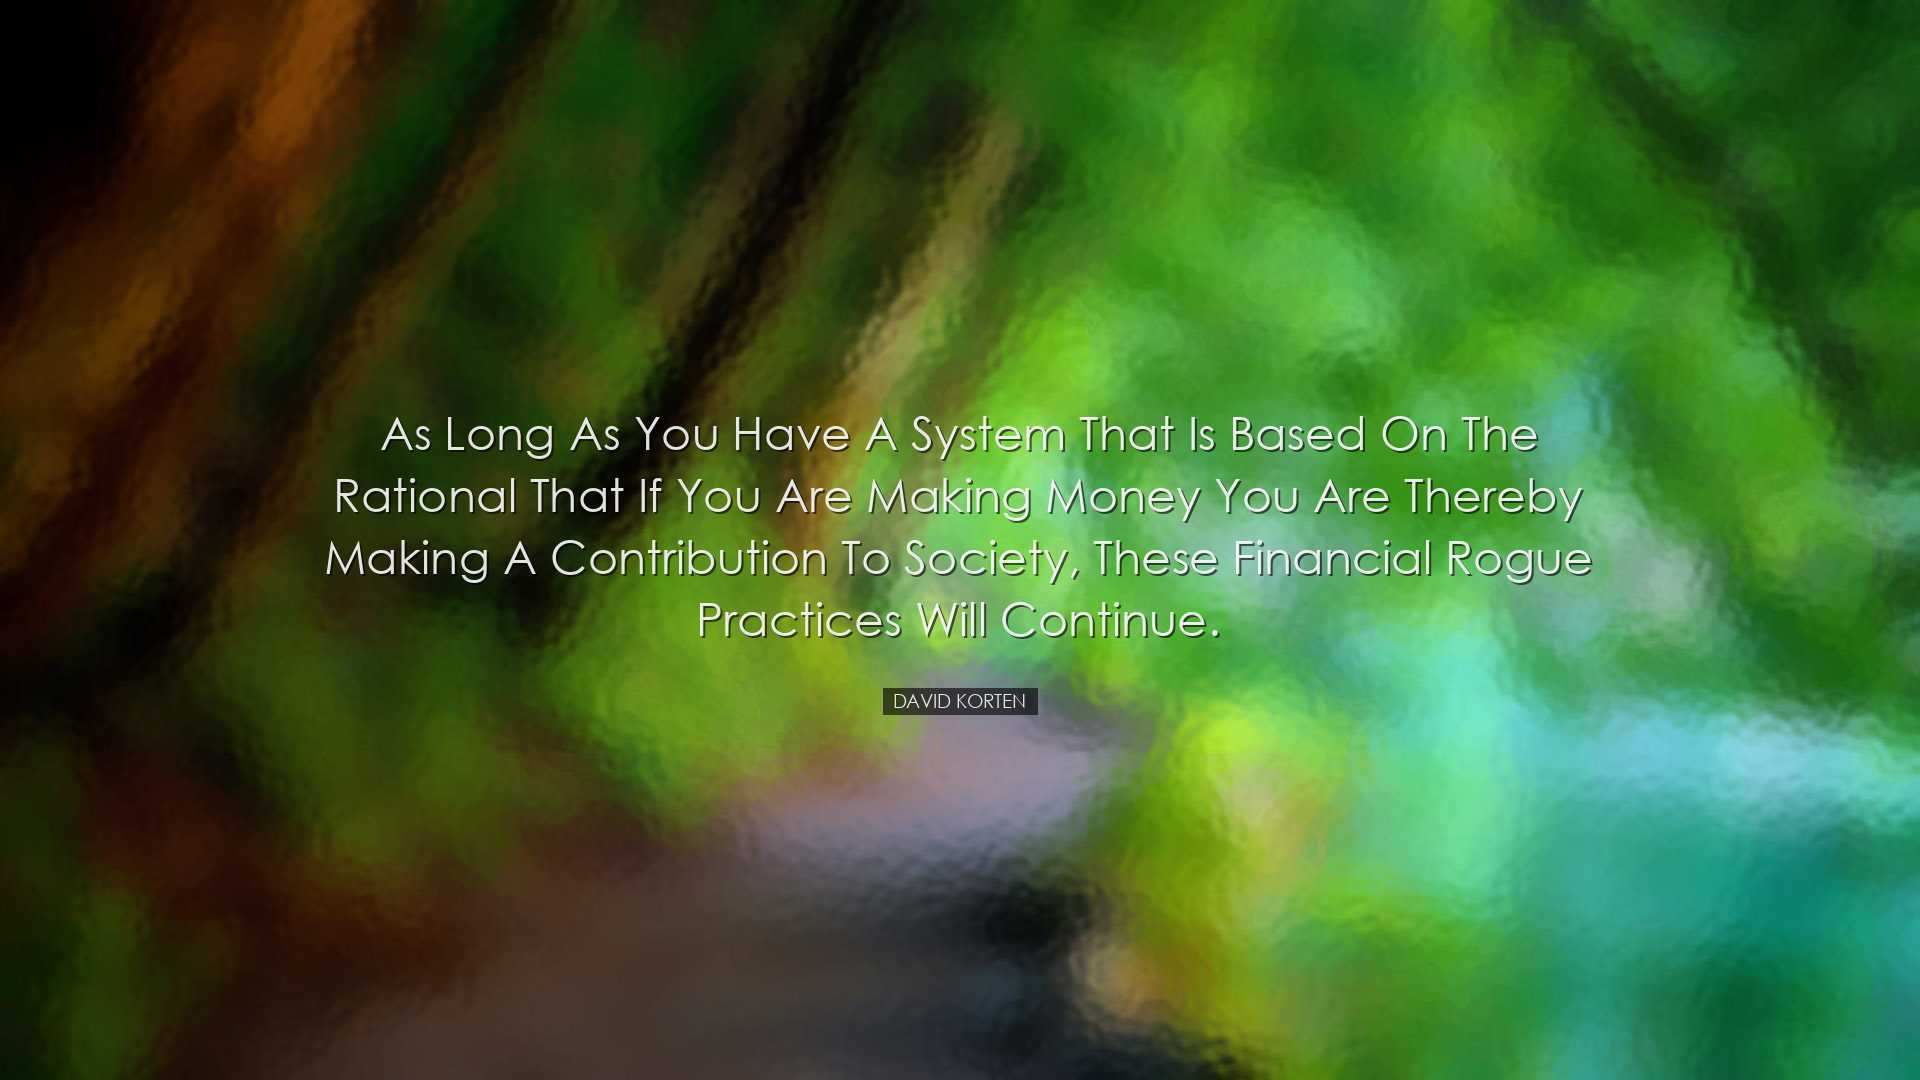 As long as you have a system that is based on the rational that if